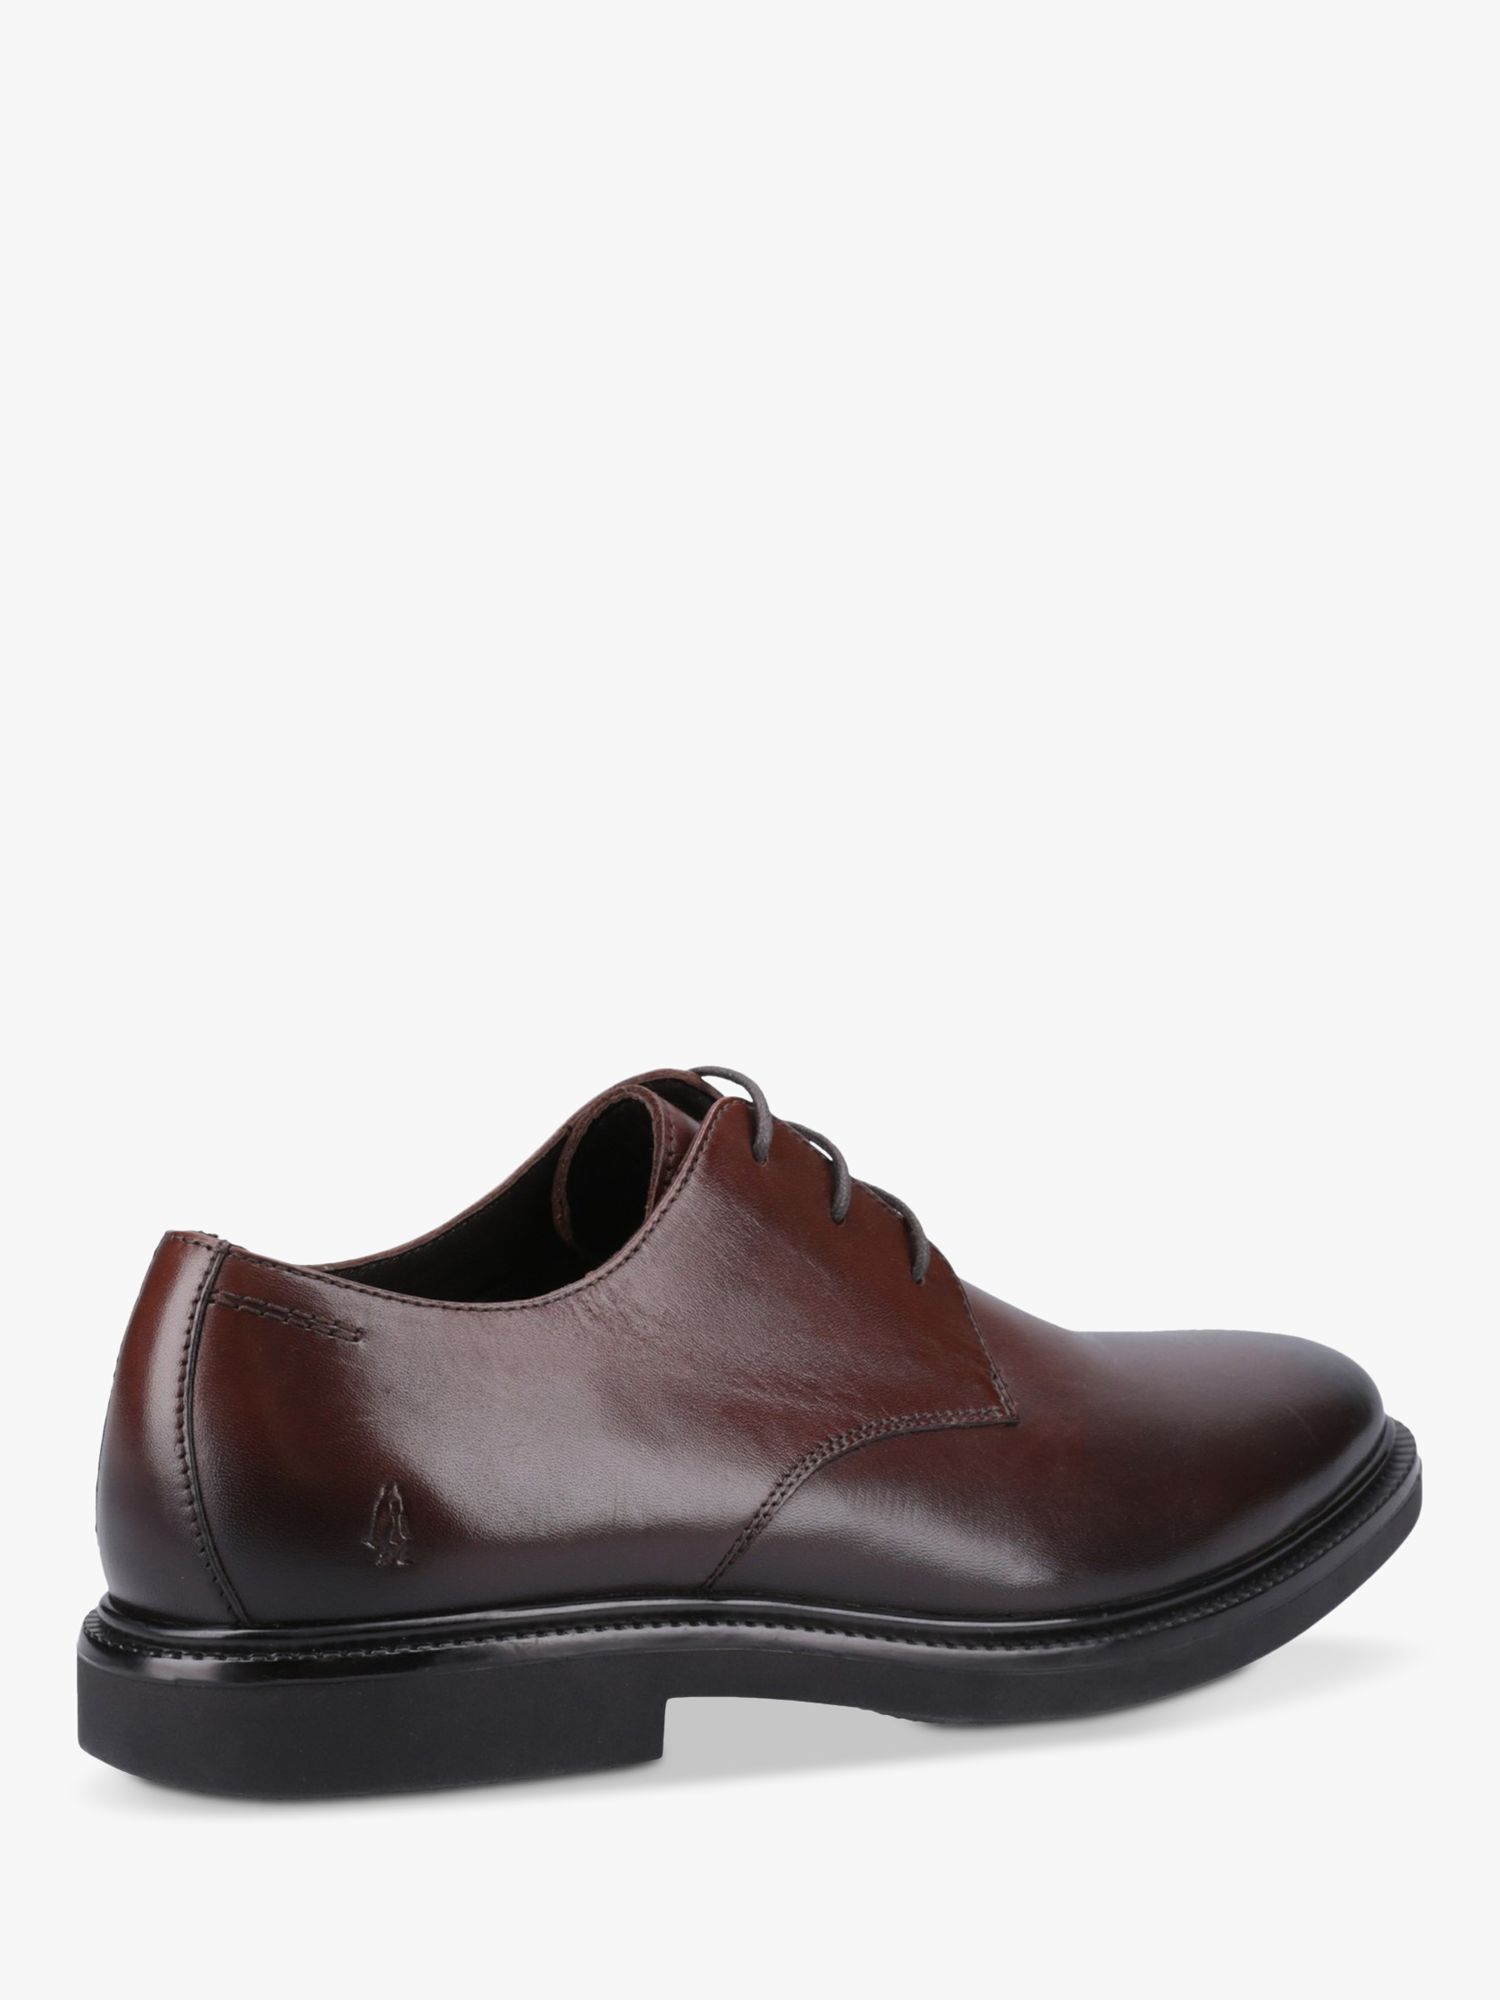 Buy Hush Puppies Kye Leather Lace Up Shoes Online at johnlewis.com